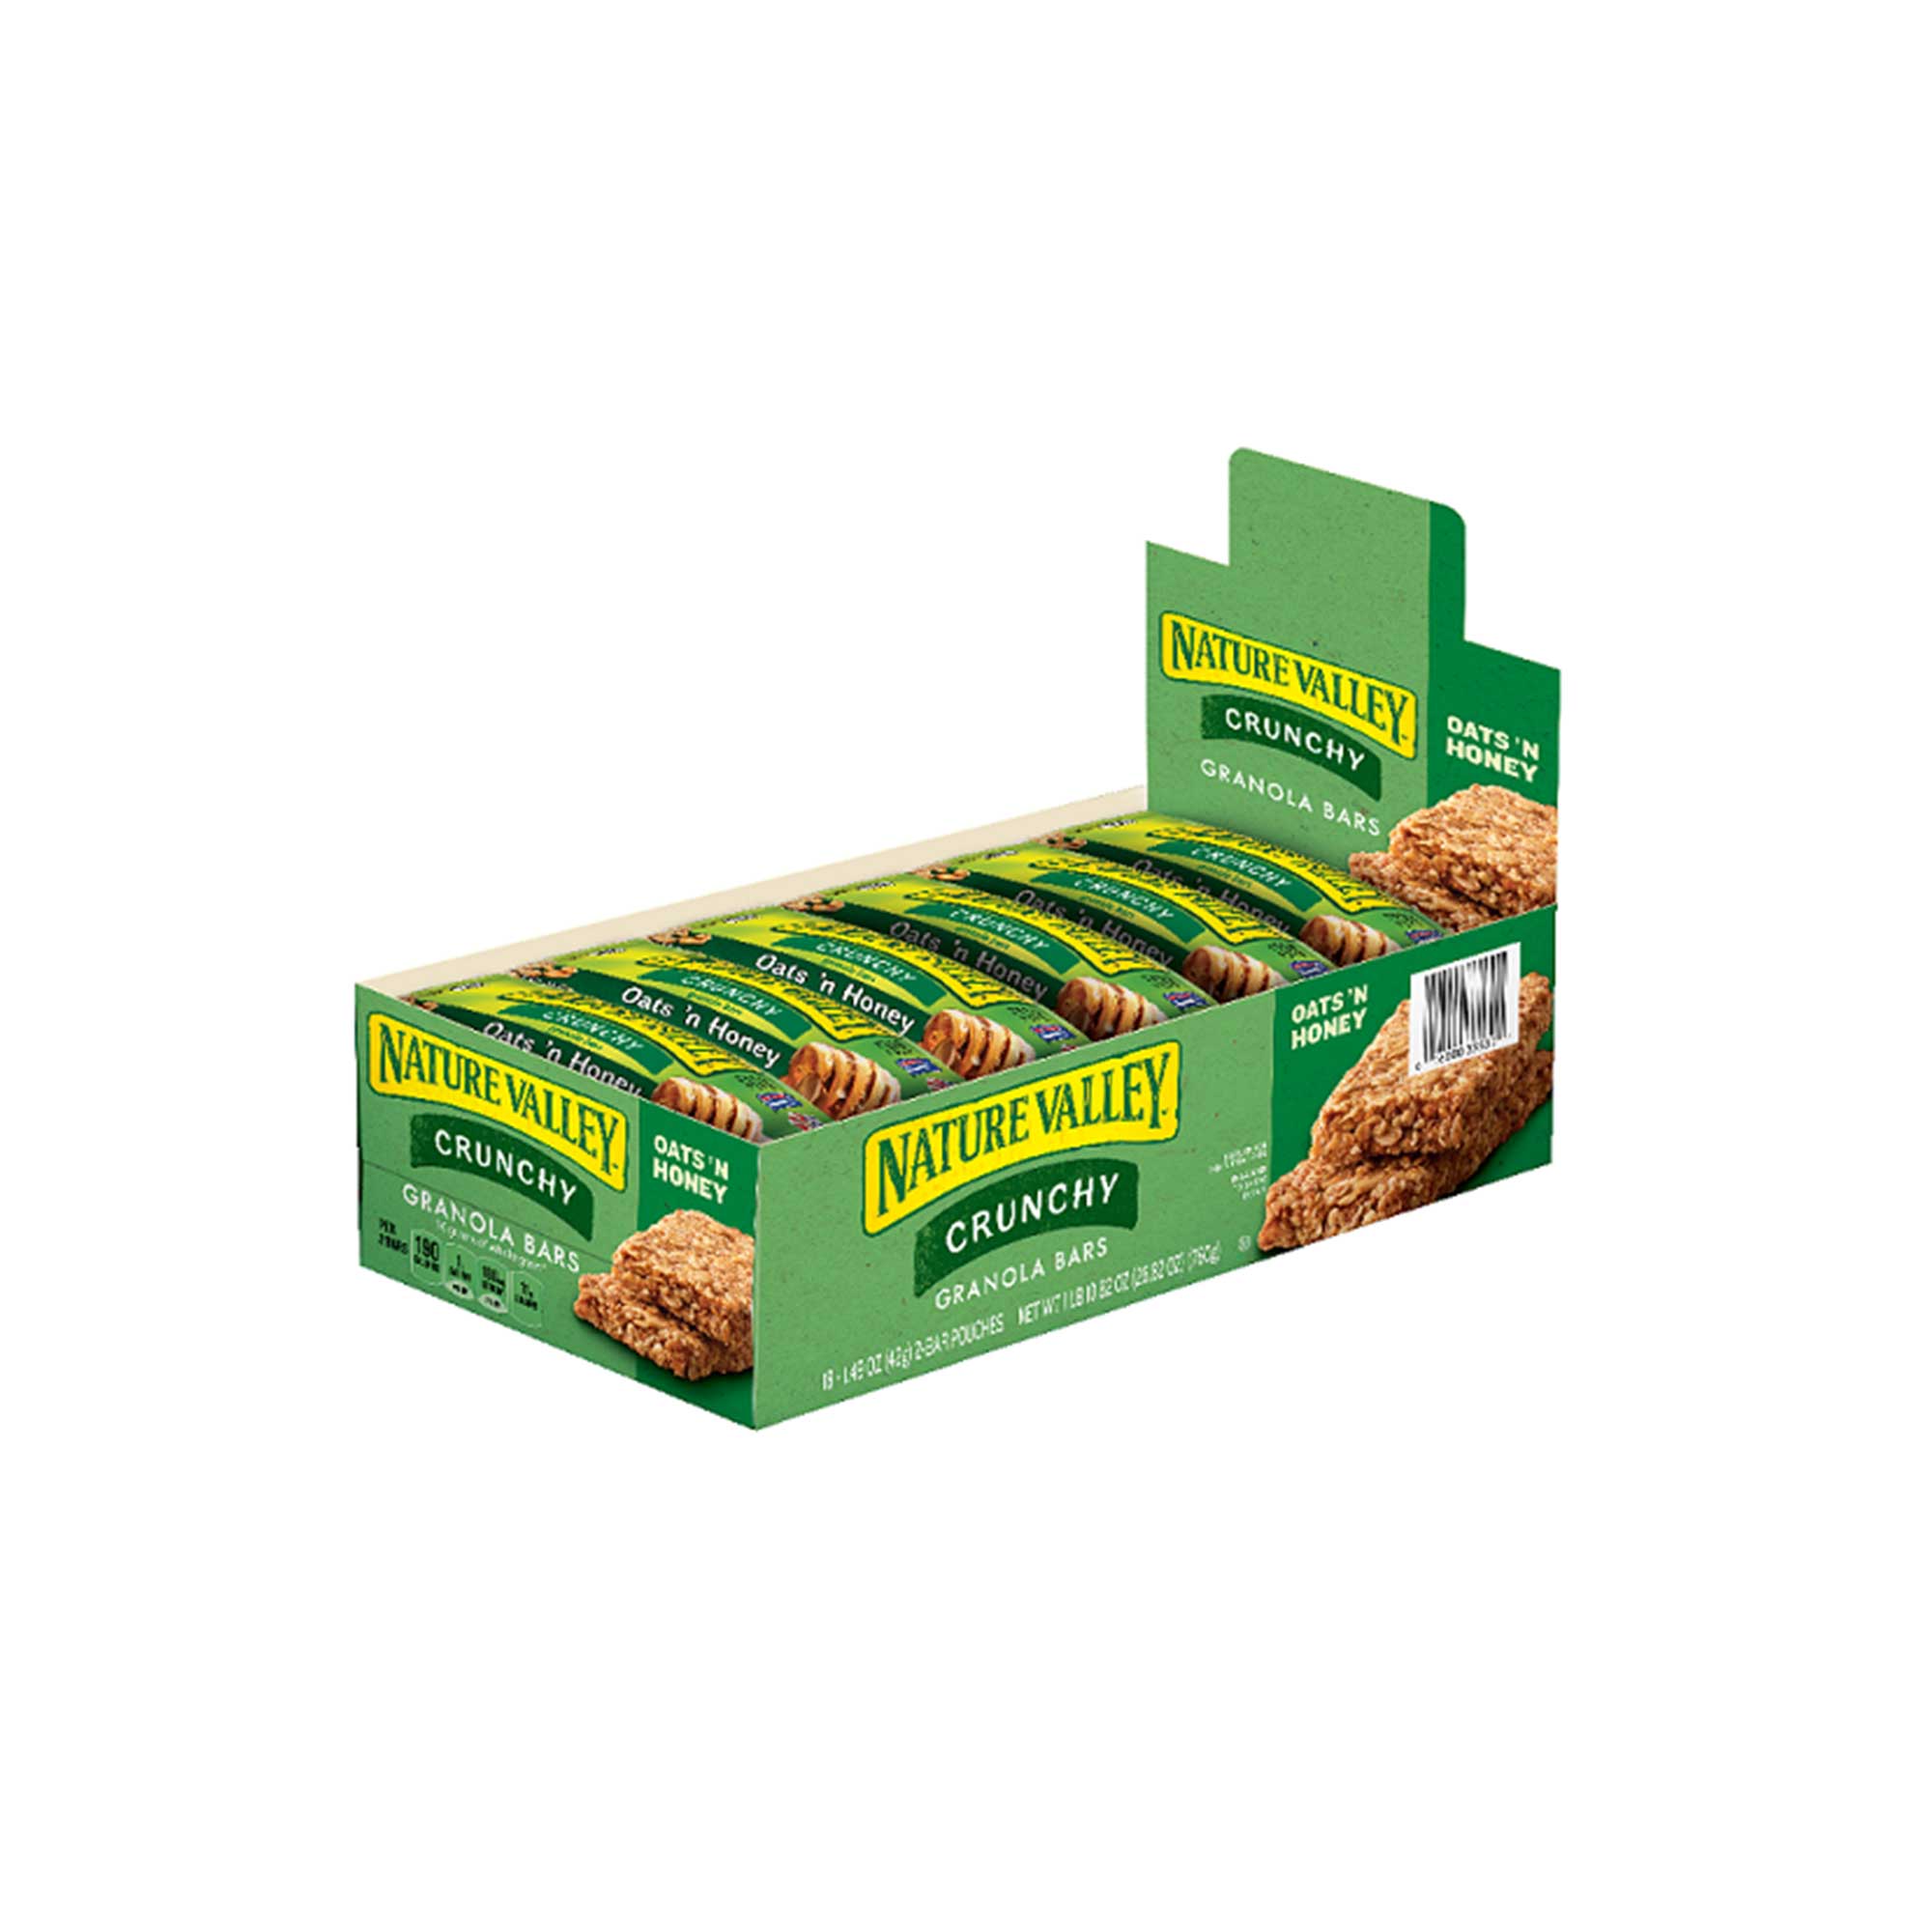 Nature Valley Oats 'n Honey Nutrition